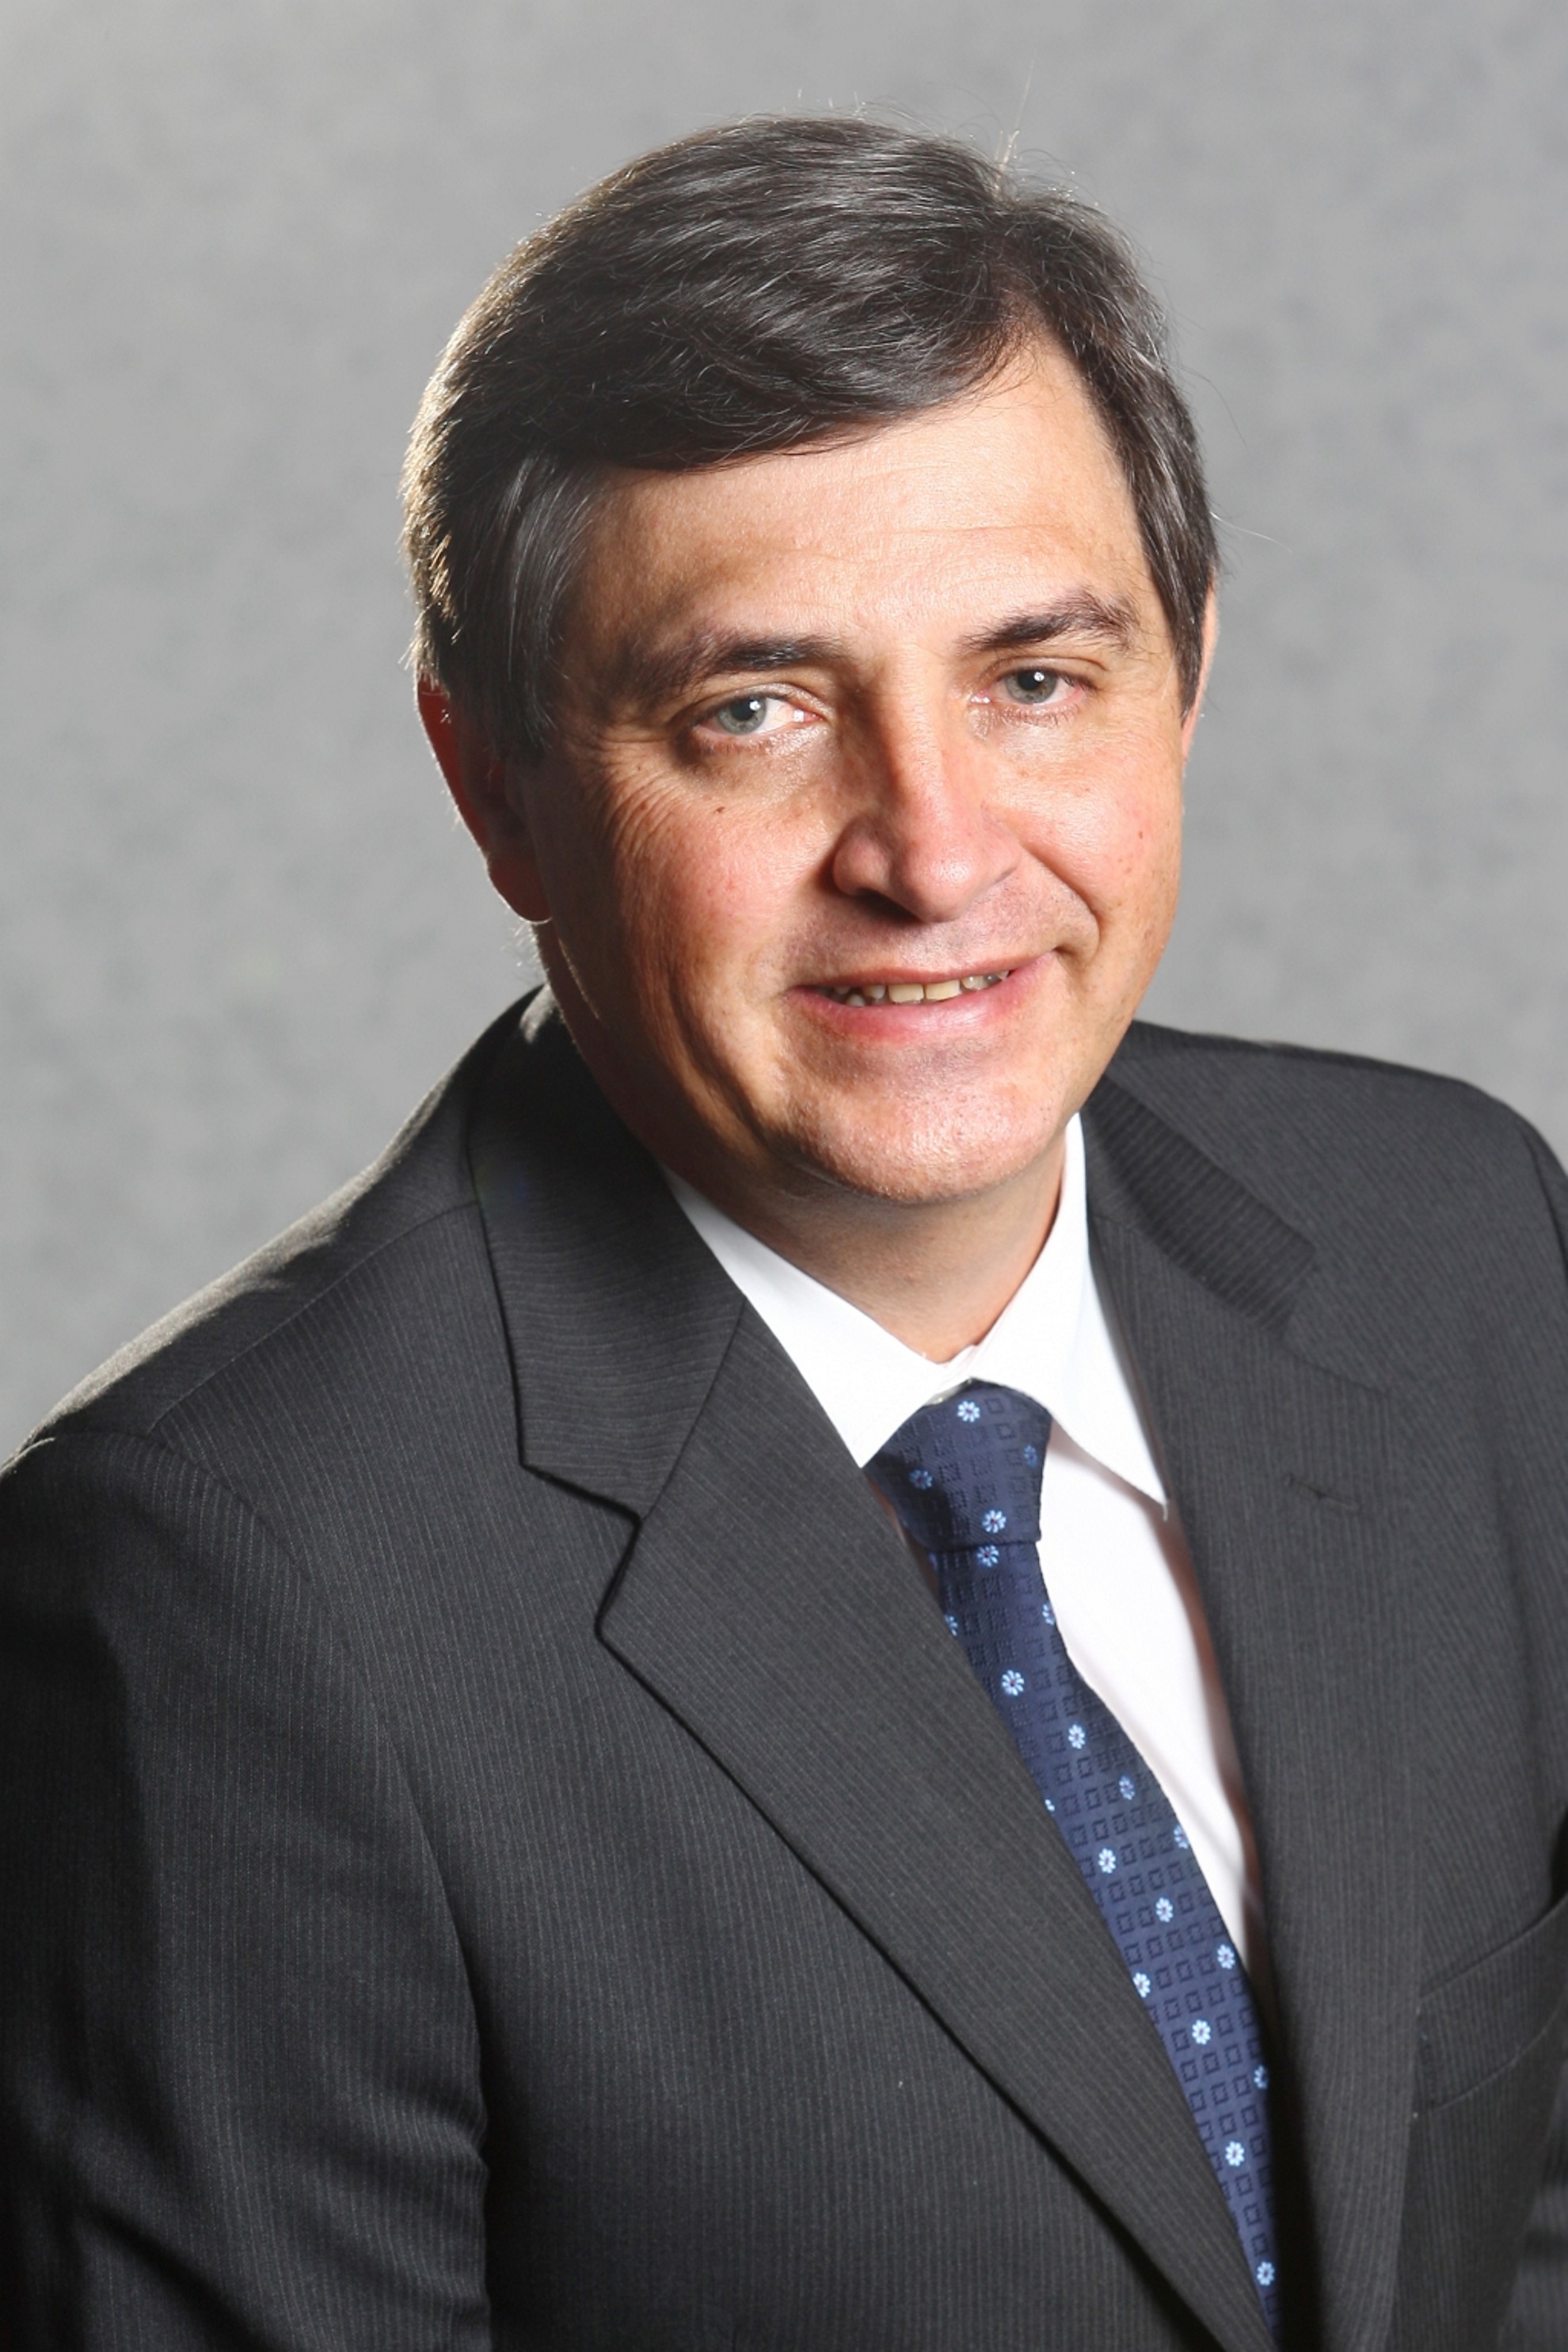 DR JOHAN VAN ZYL APPOINTED AS CHIEF EXECUTIVE OFFICER FOR TOYOTA OF AFRICA